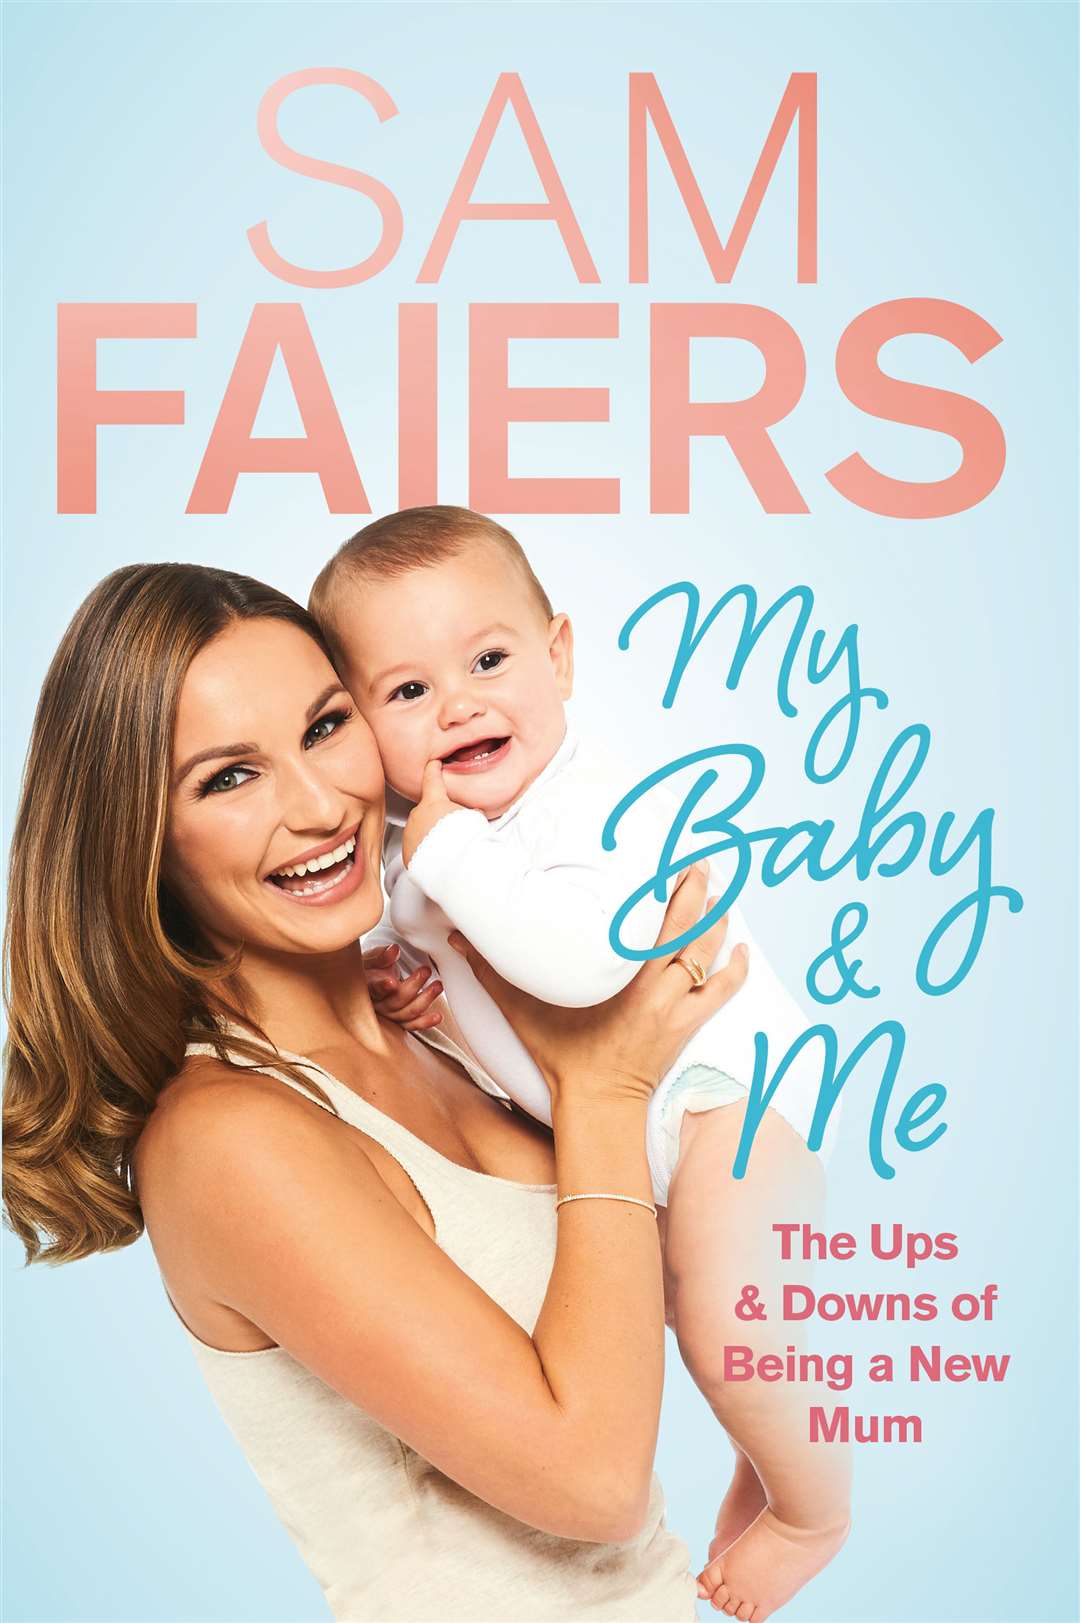 My Baby & Me by Sam Faiers is published by Blink, priced £14.99